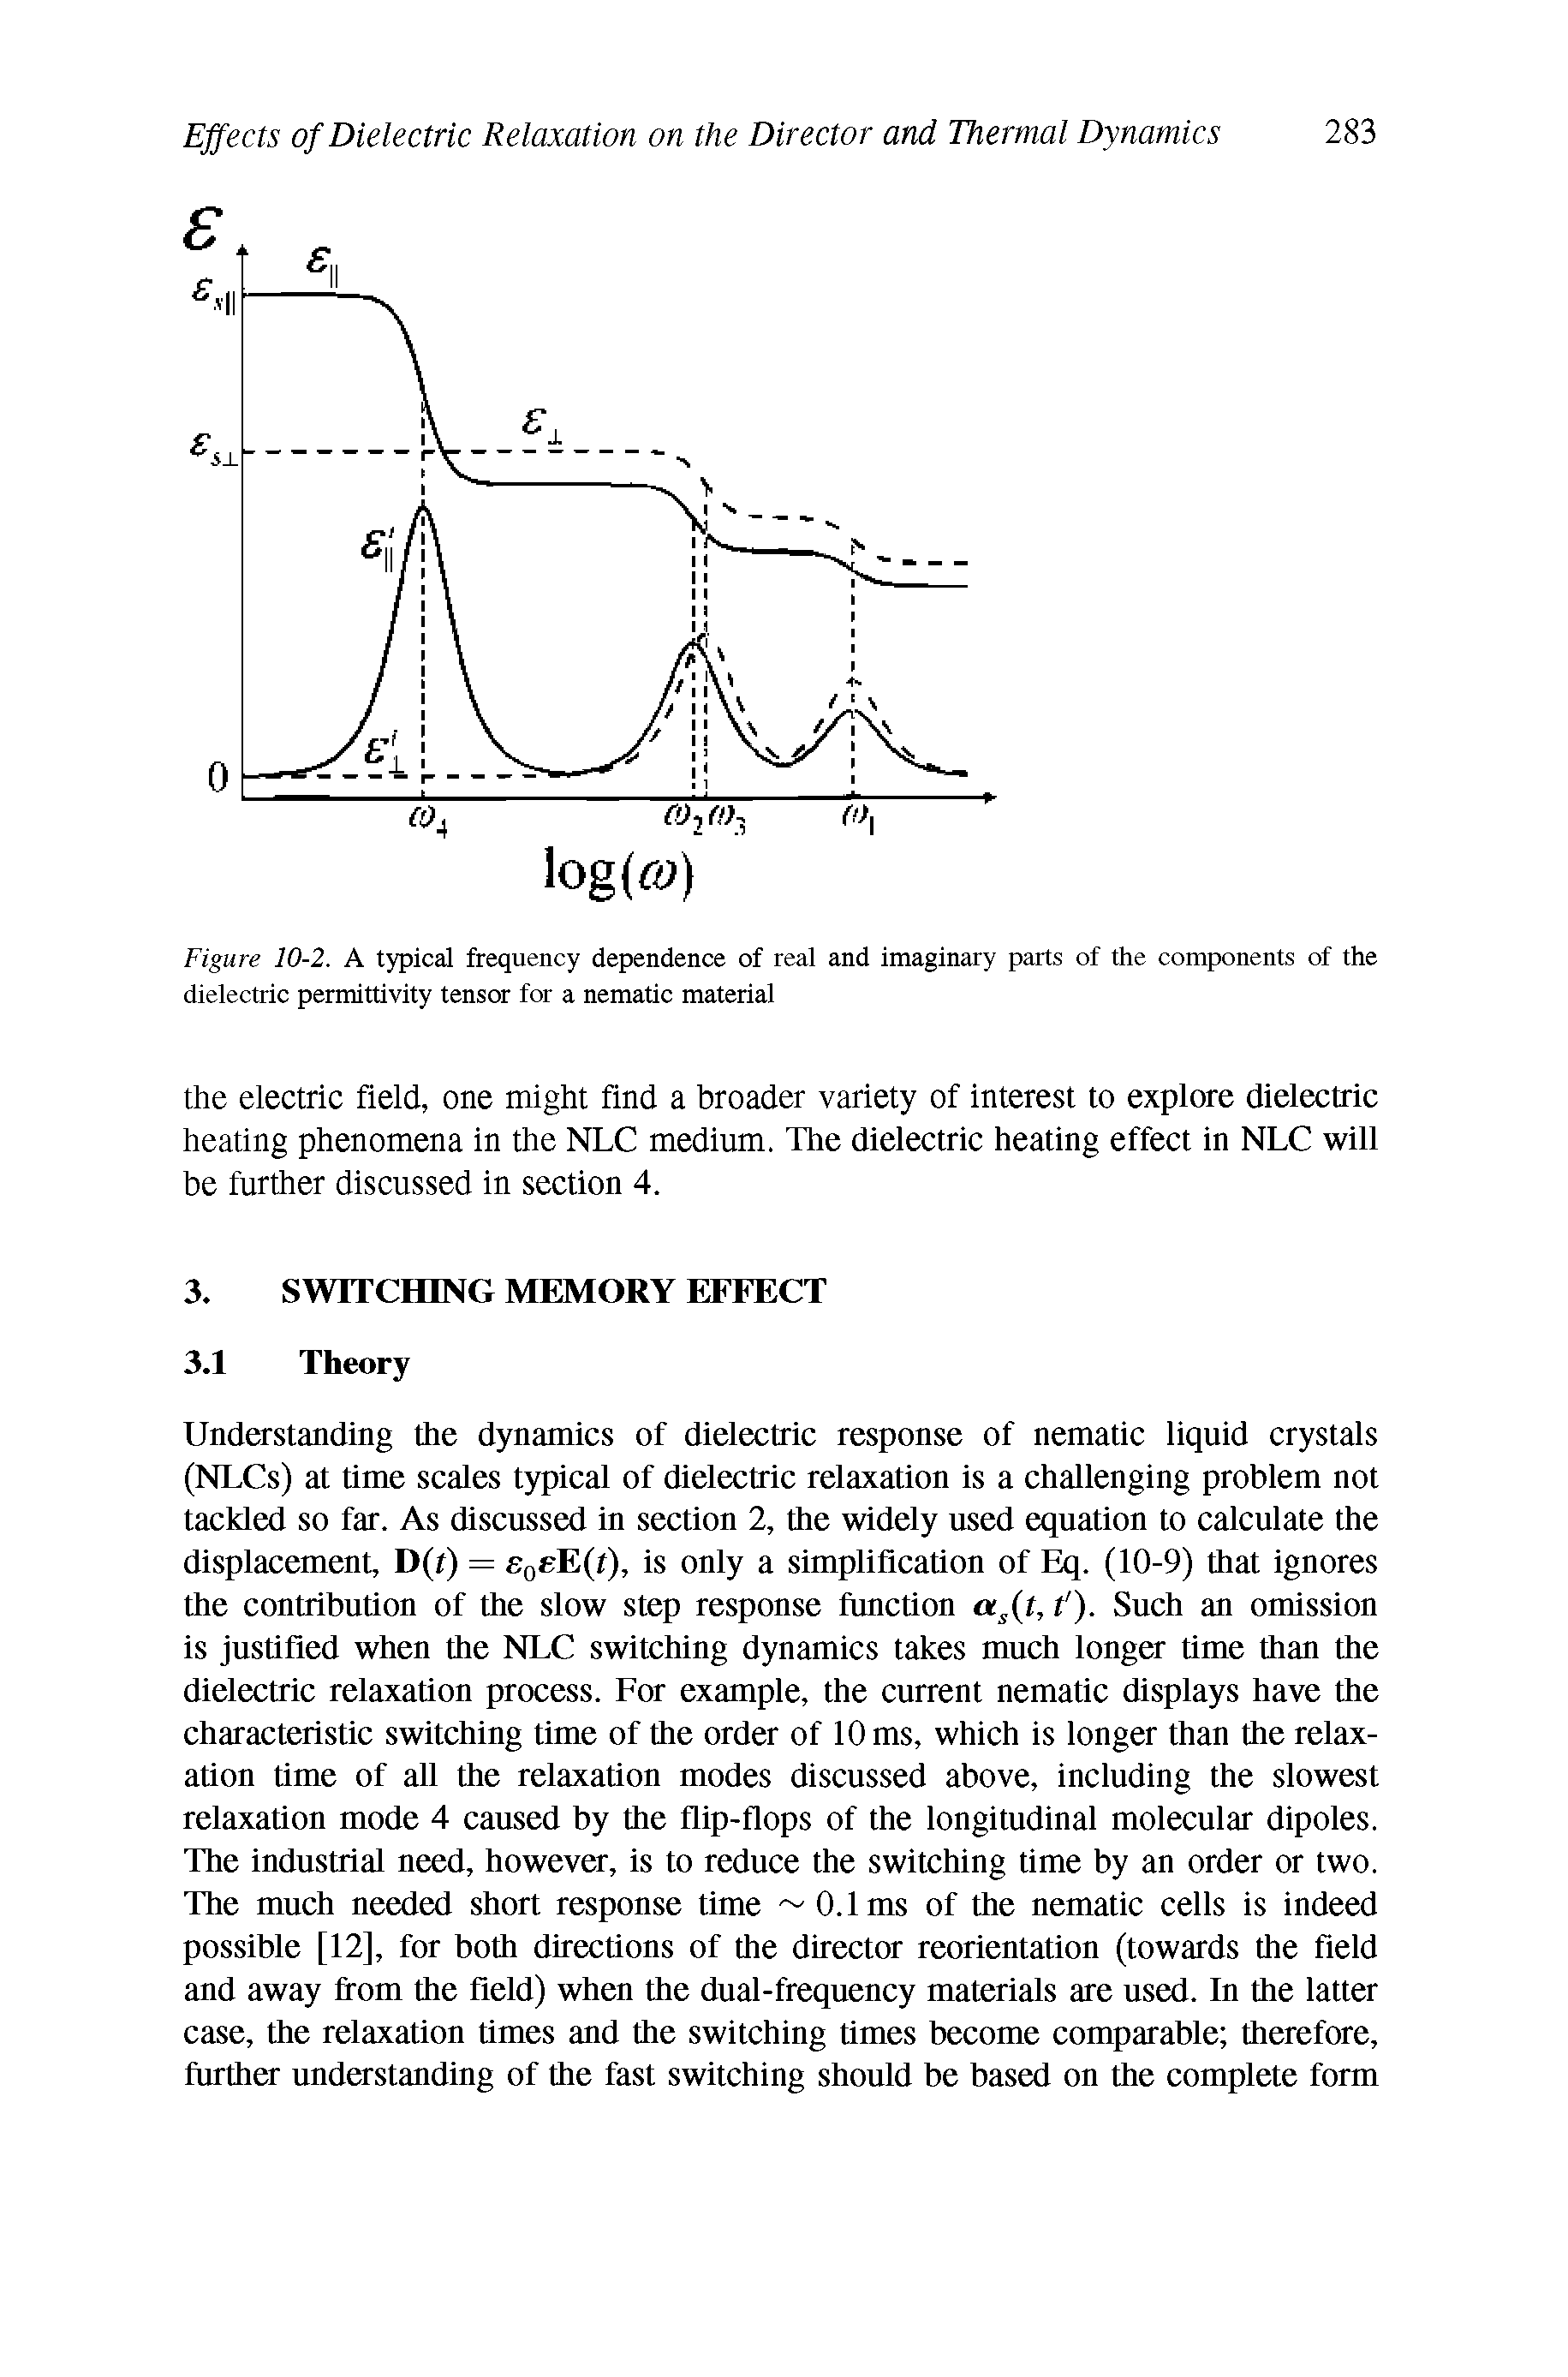 Figure 10-2. A typical frequency dependence of real and imaginary parts of the components of the dielectric permittivity tensor for a nematic material...